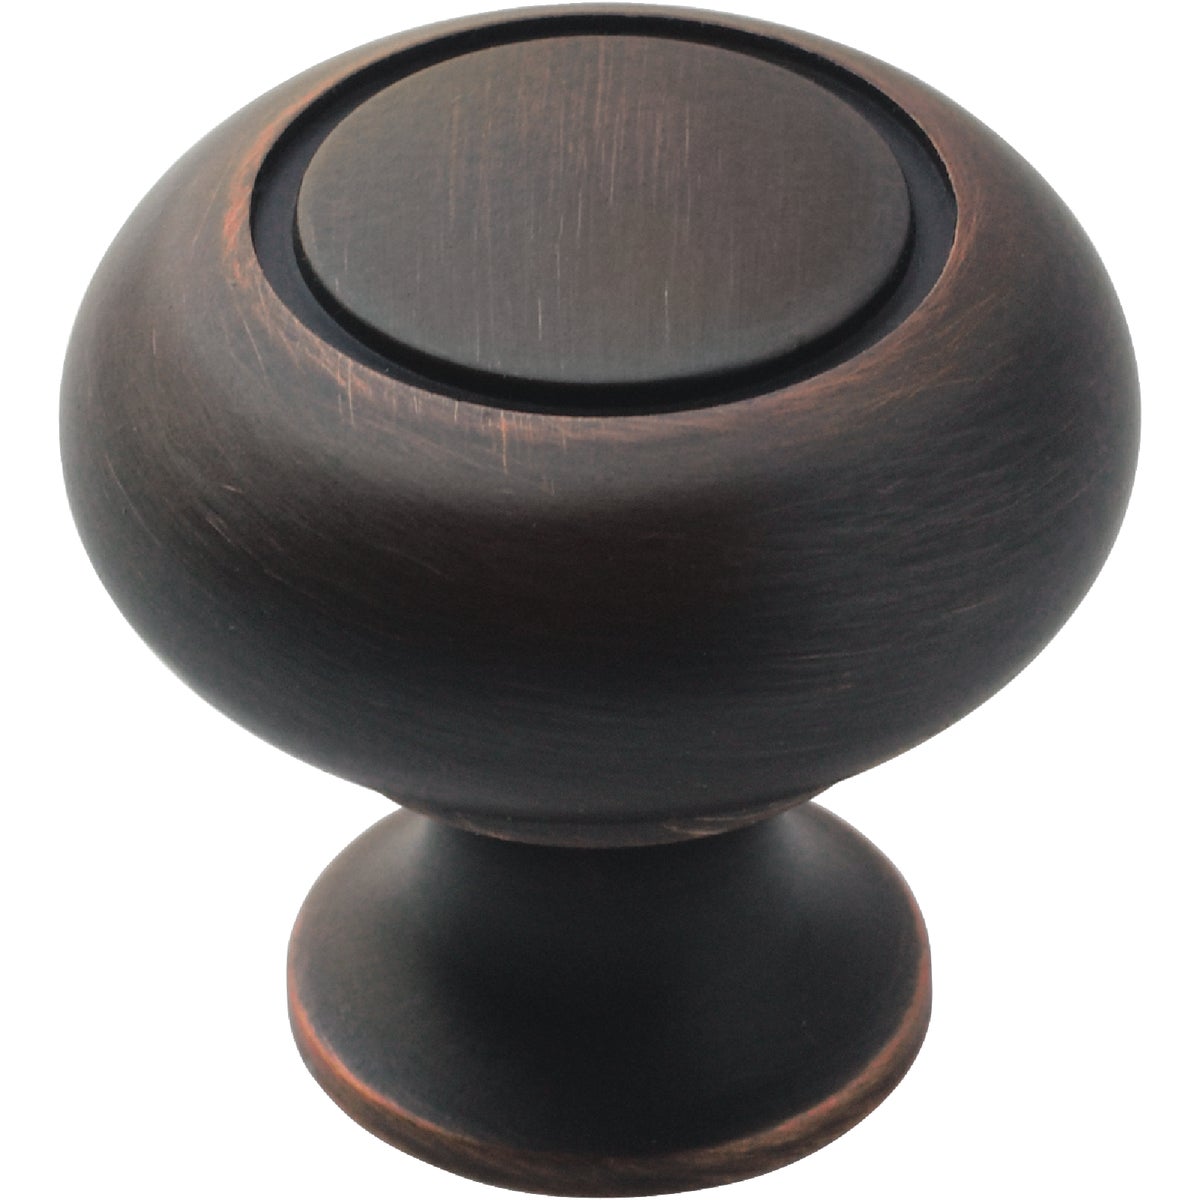 Amerock Everyday Heritage Oil Rubbed Bronze 1-1/4 In. Cabinet Knob